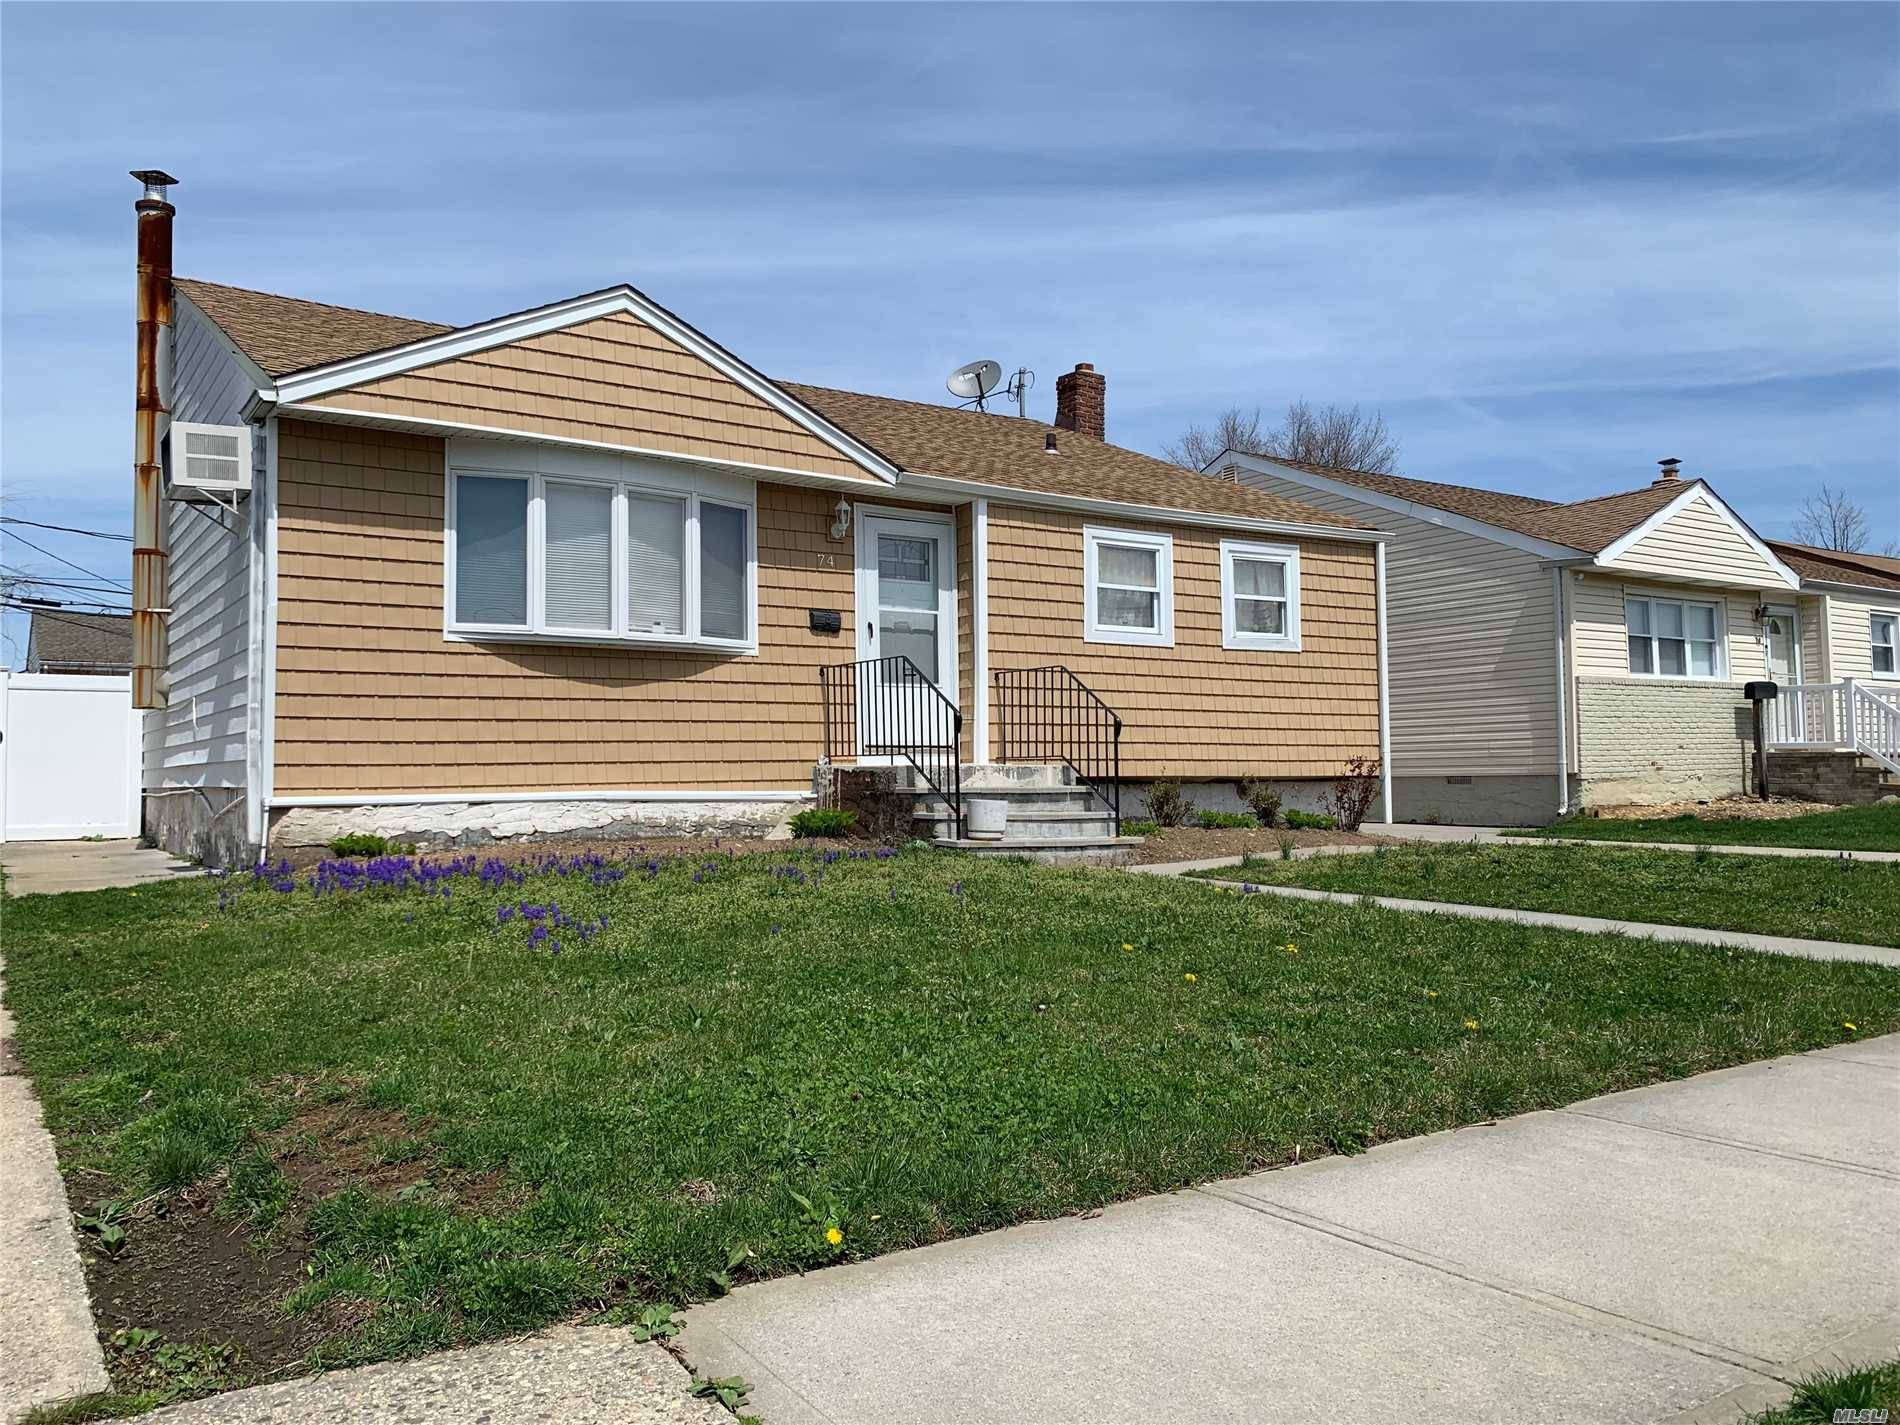 3 Bdr, 2 Bath Cape In The Heart Of Freeport.